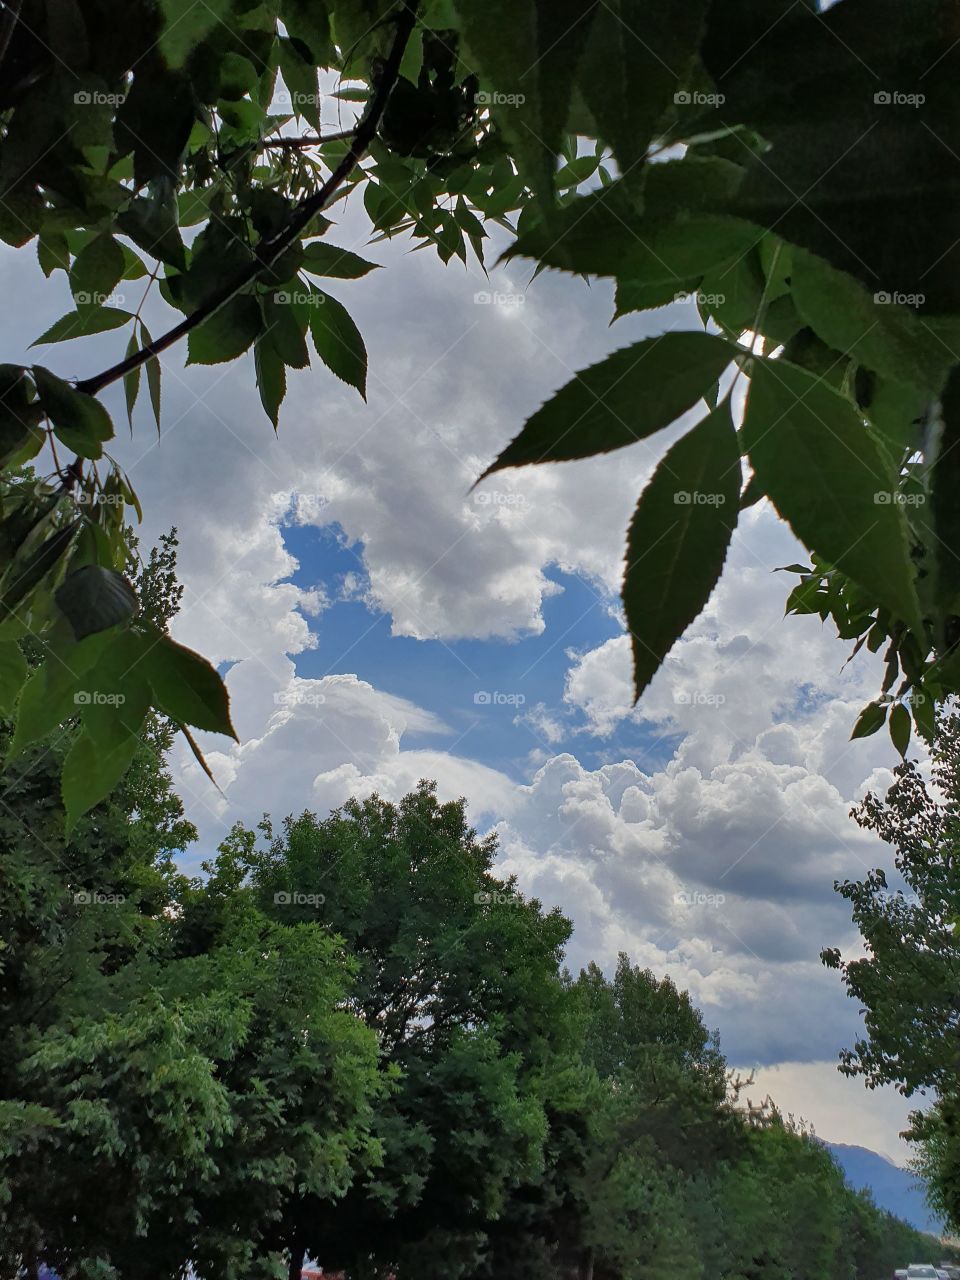 drammatic sky in the frame of green leaves and trees